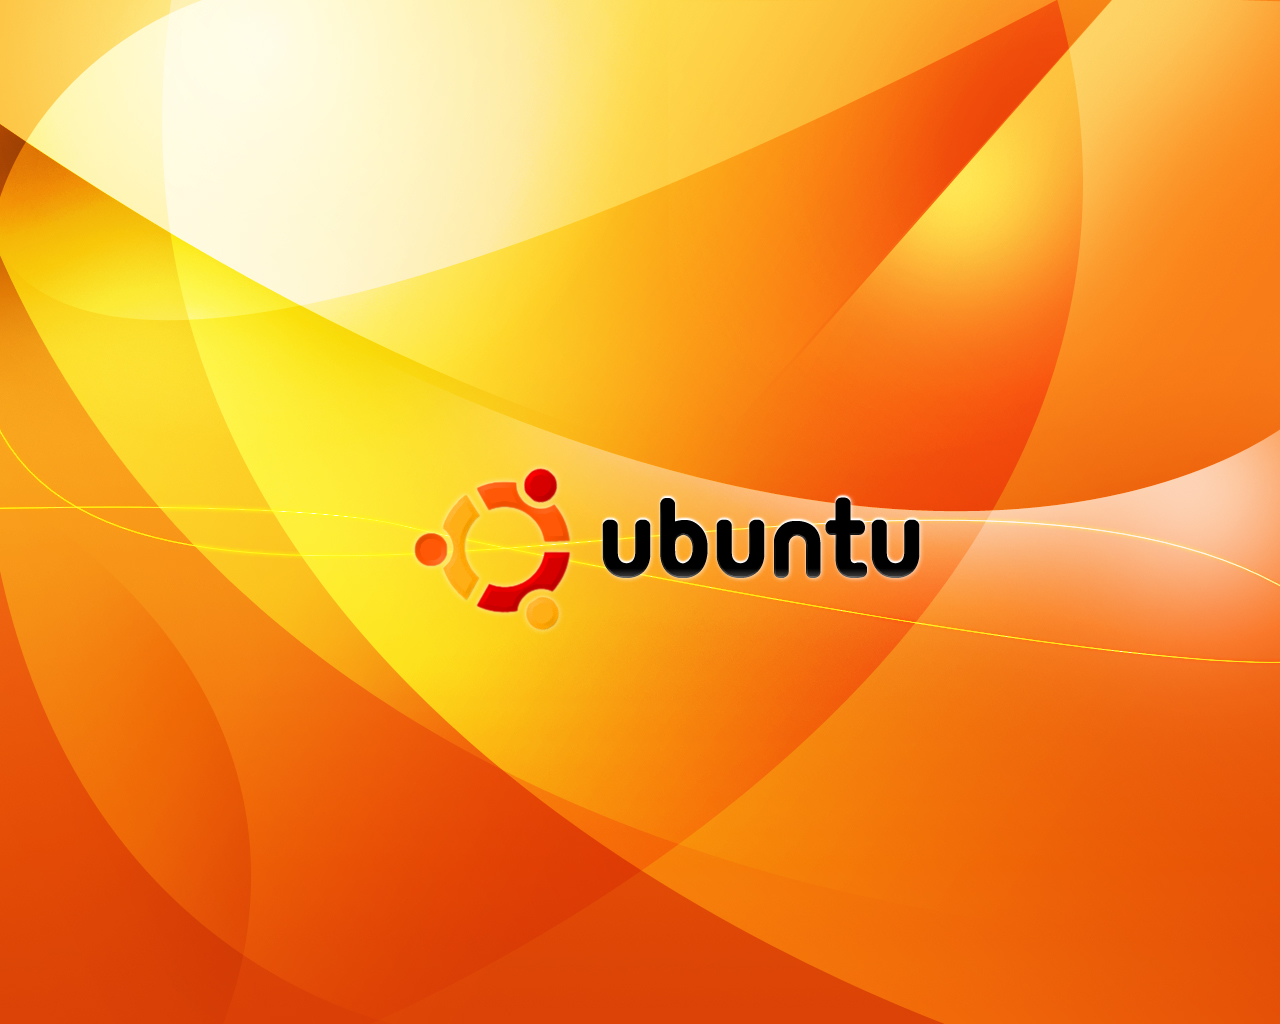 Oh Ubuntu, you are my favorite linux-based OS…